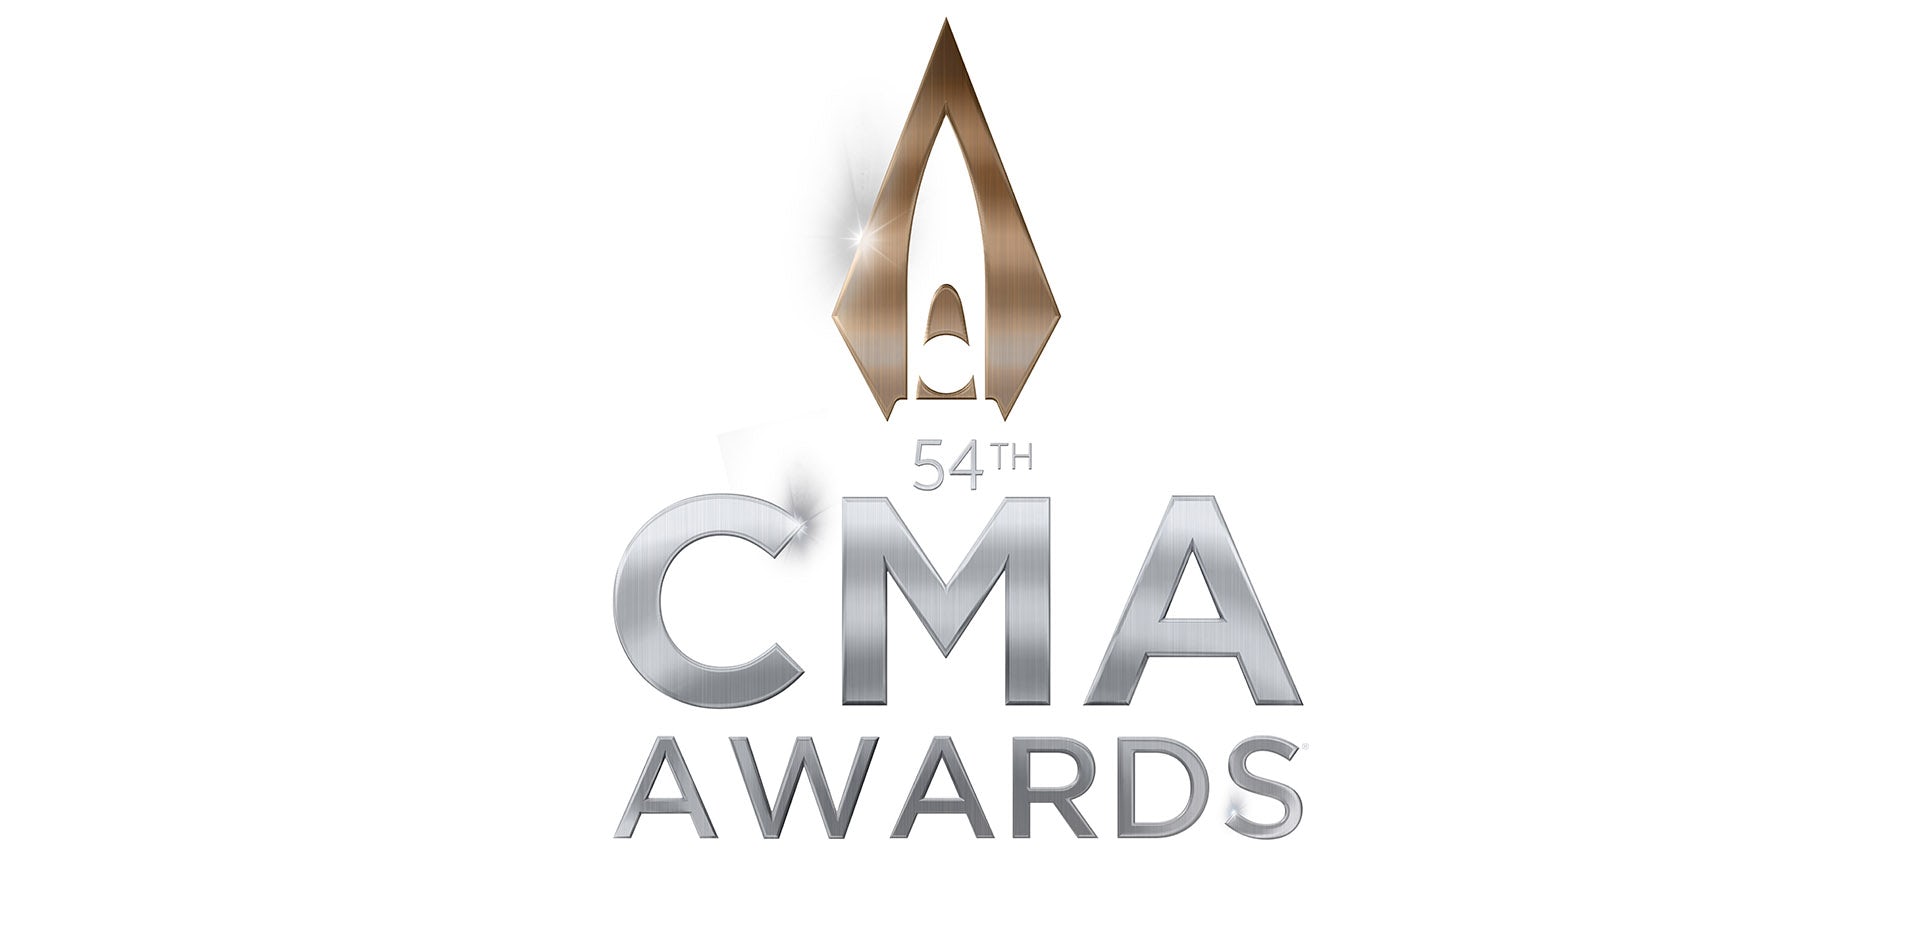 "THE 54TH ANNUAL CMA AWARDS" REVEALS EVEN MORE PERFORMANCE DETAILS AND